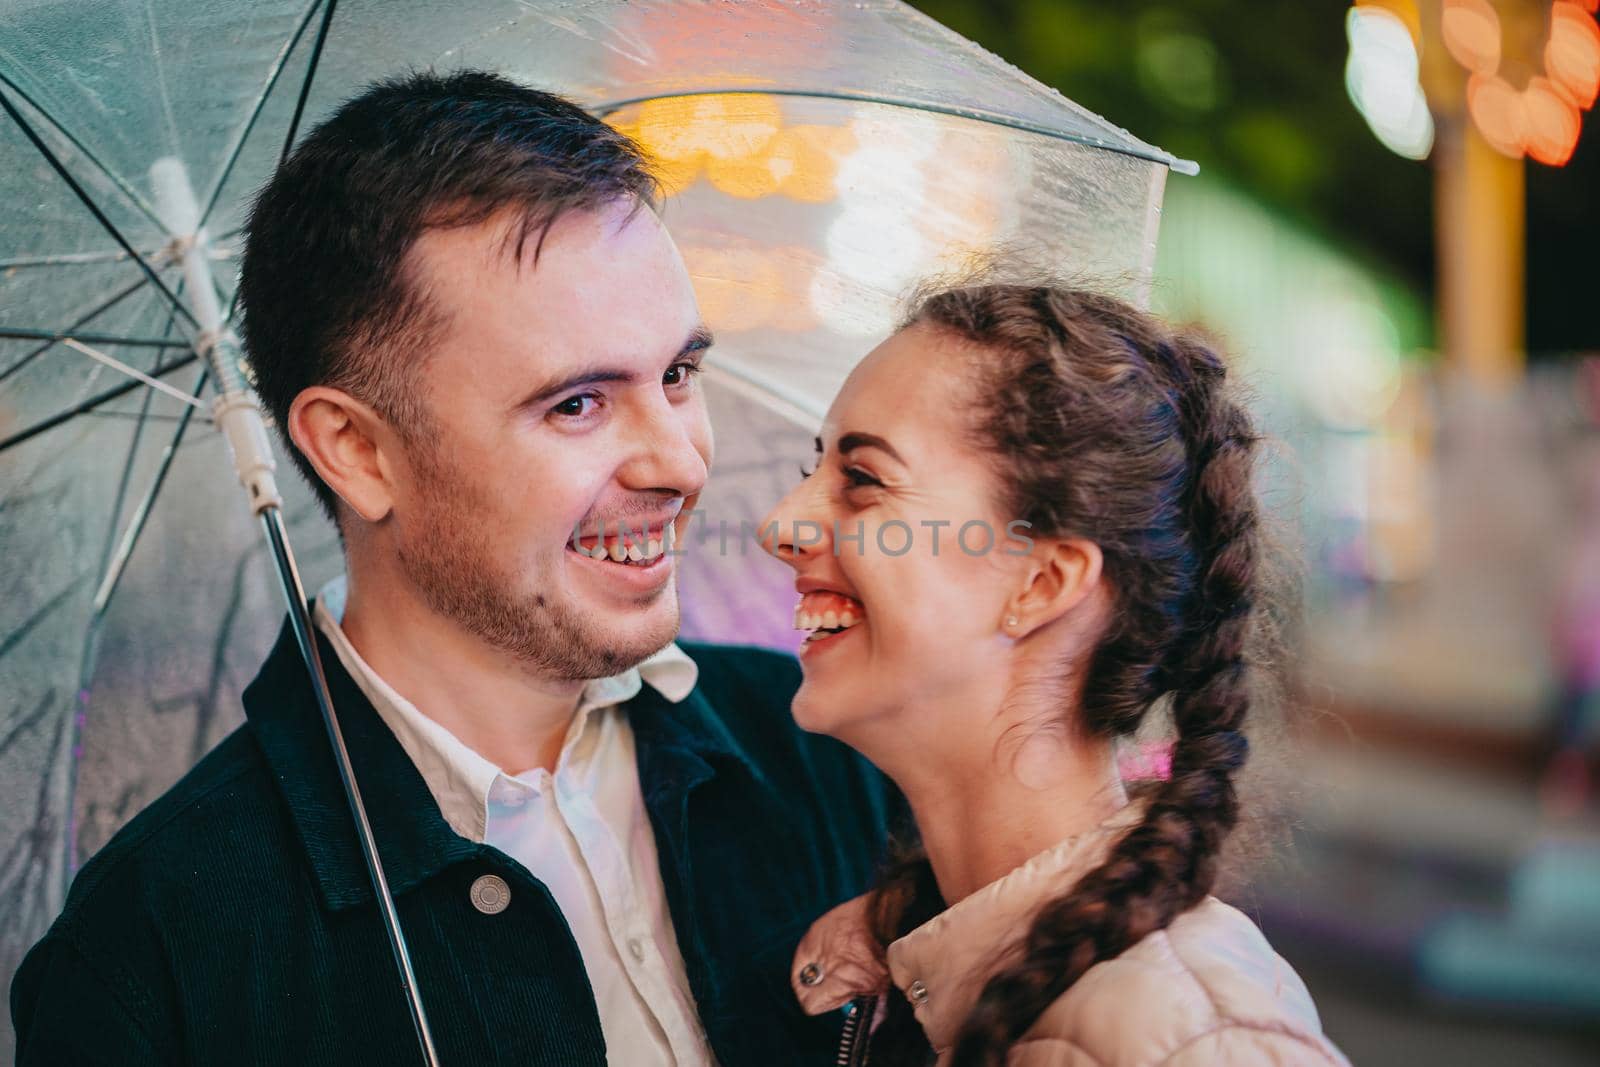 Young beautiful couple spending time together on date in amusement park at night. Rainy weather, autumn. Lovers standing under umbrella. Illuminated background. High quality photo